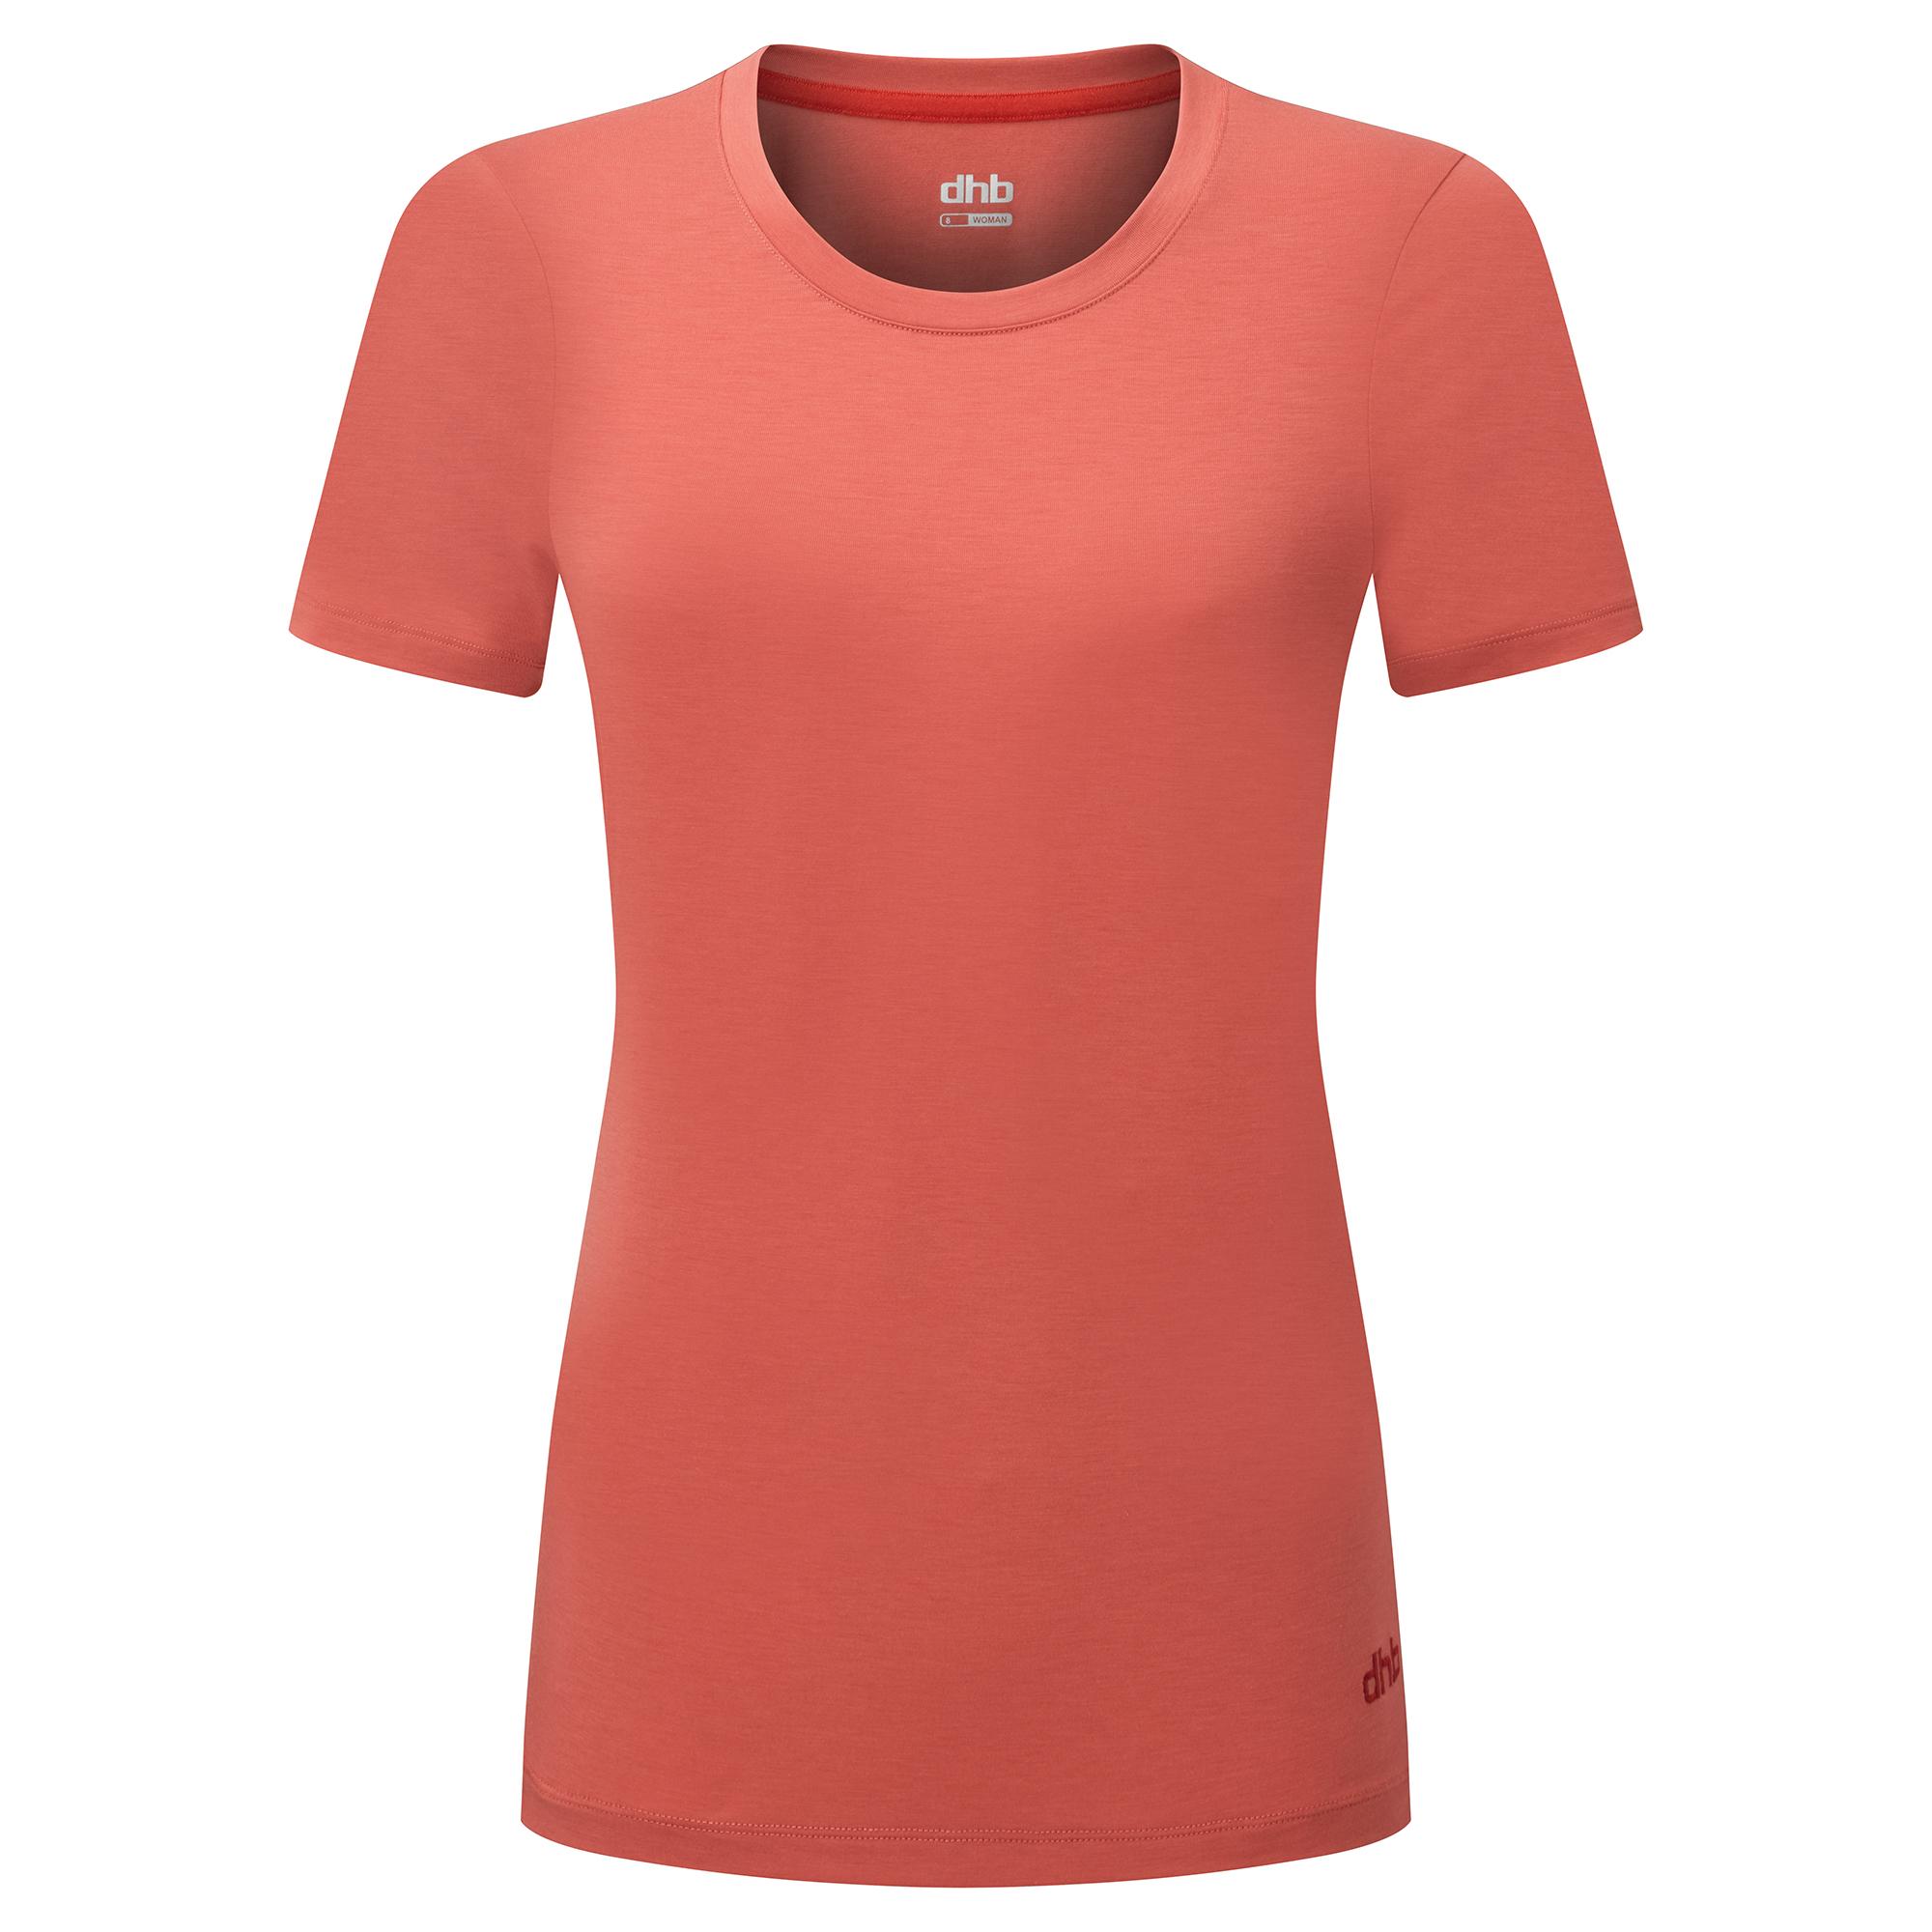 Dhb Trail Womens Short Sleeve Jersey - Drirelease  Red